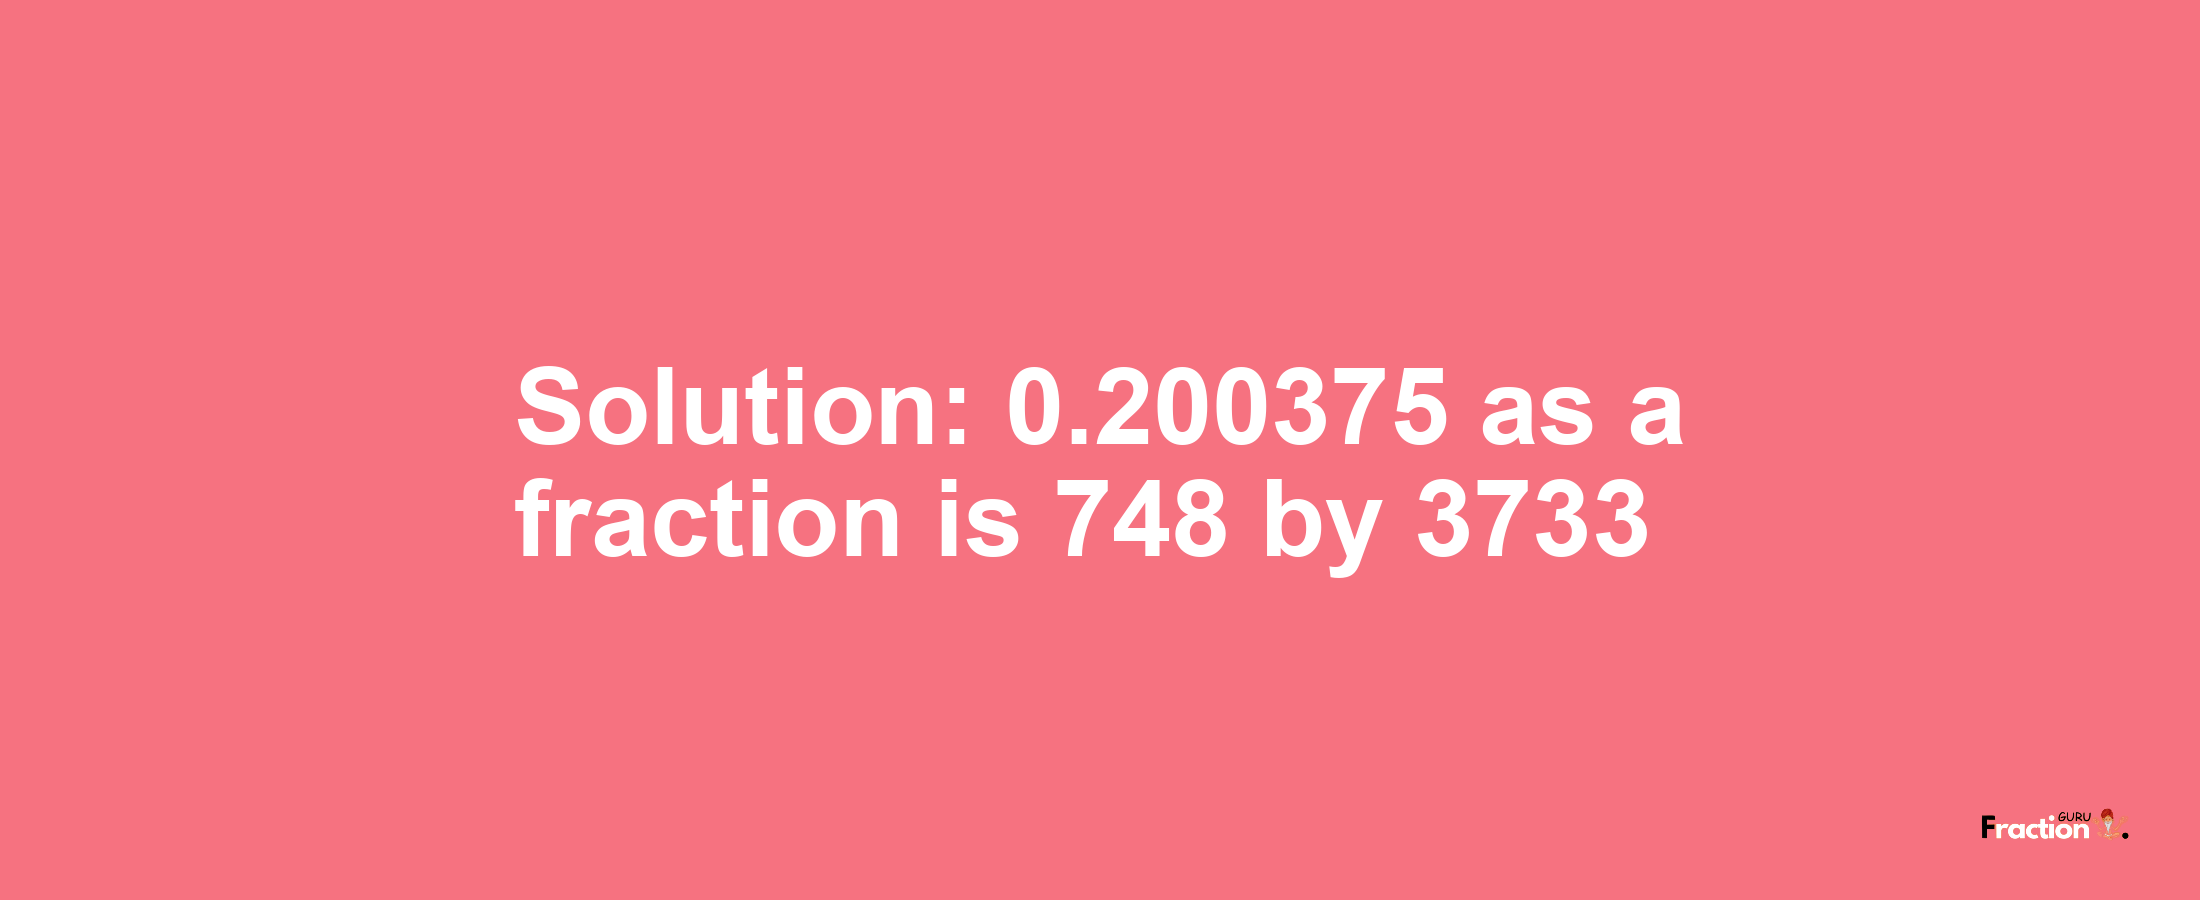 Solution:0.200375 as a fraction is 748/3733